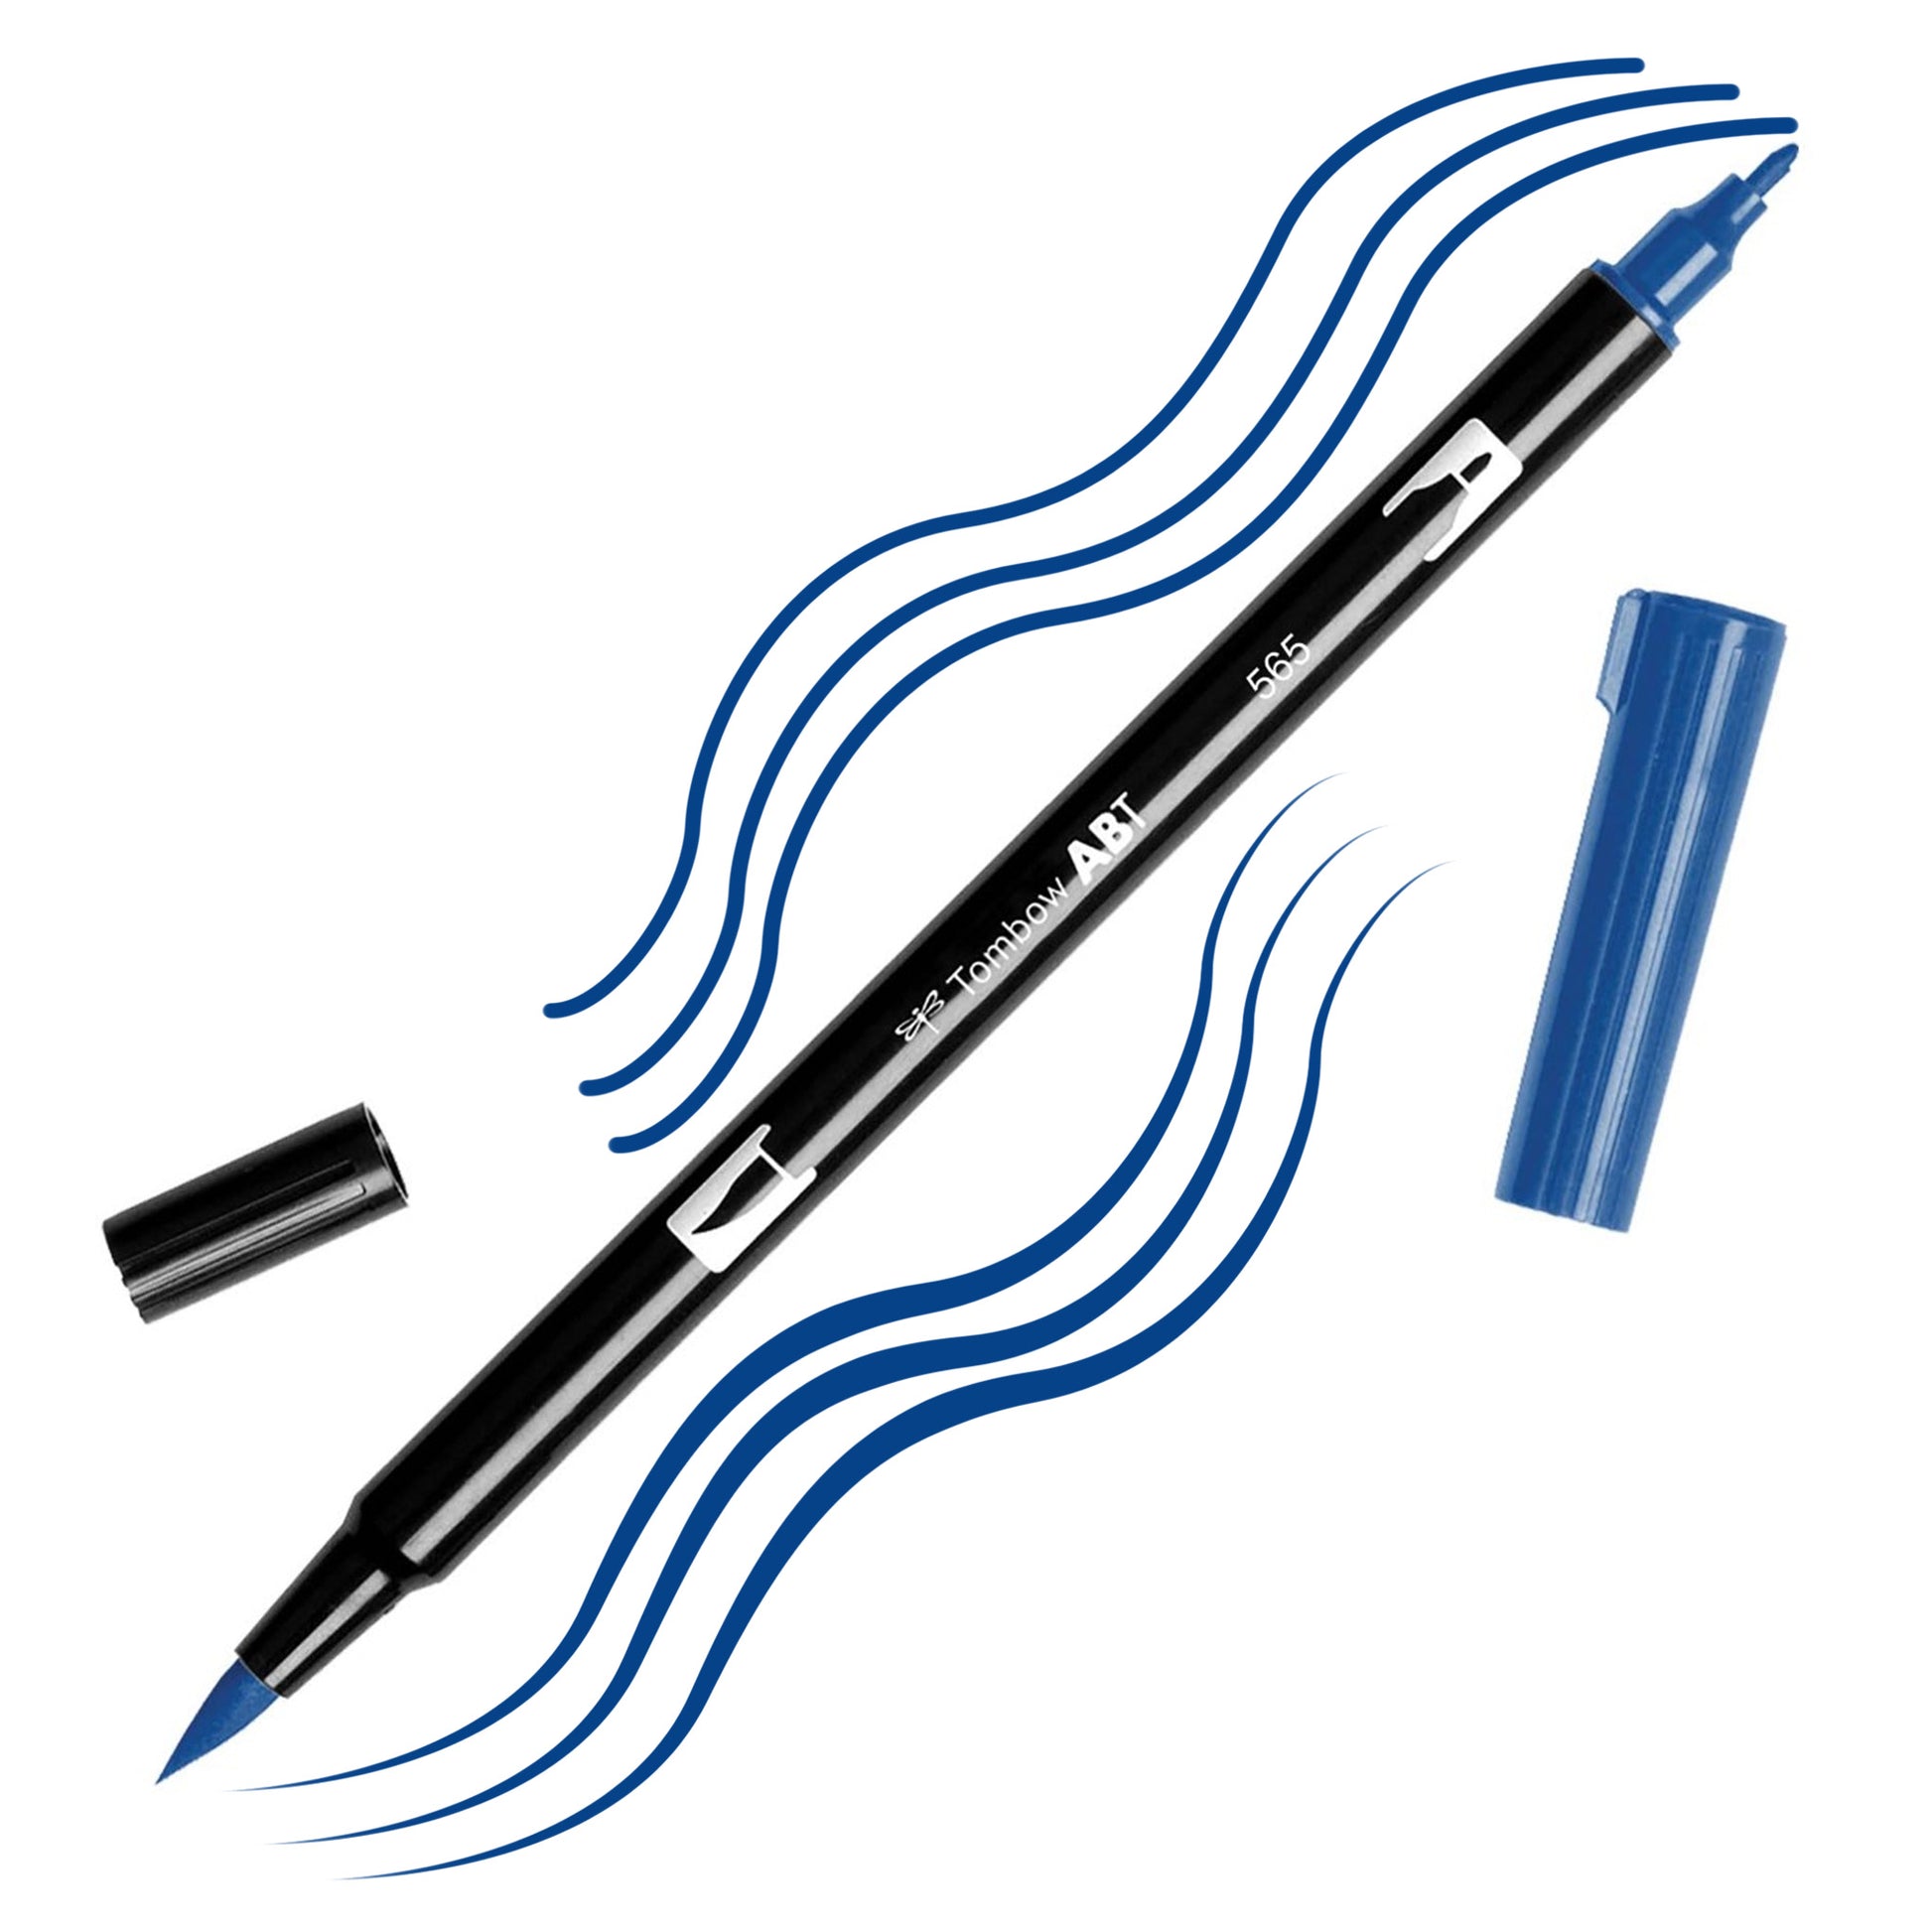 Deep Blue Tombow double-headed brush-pen with a flexible nylon fiber brush tip and a fine tip against a white background with Deep Blue strokes